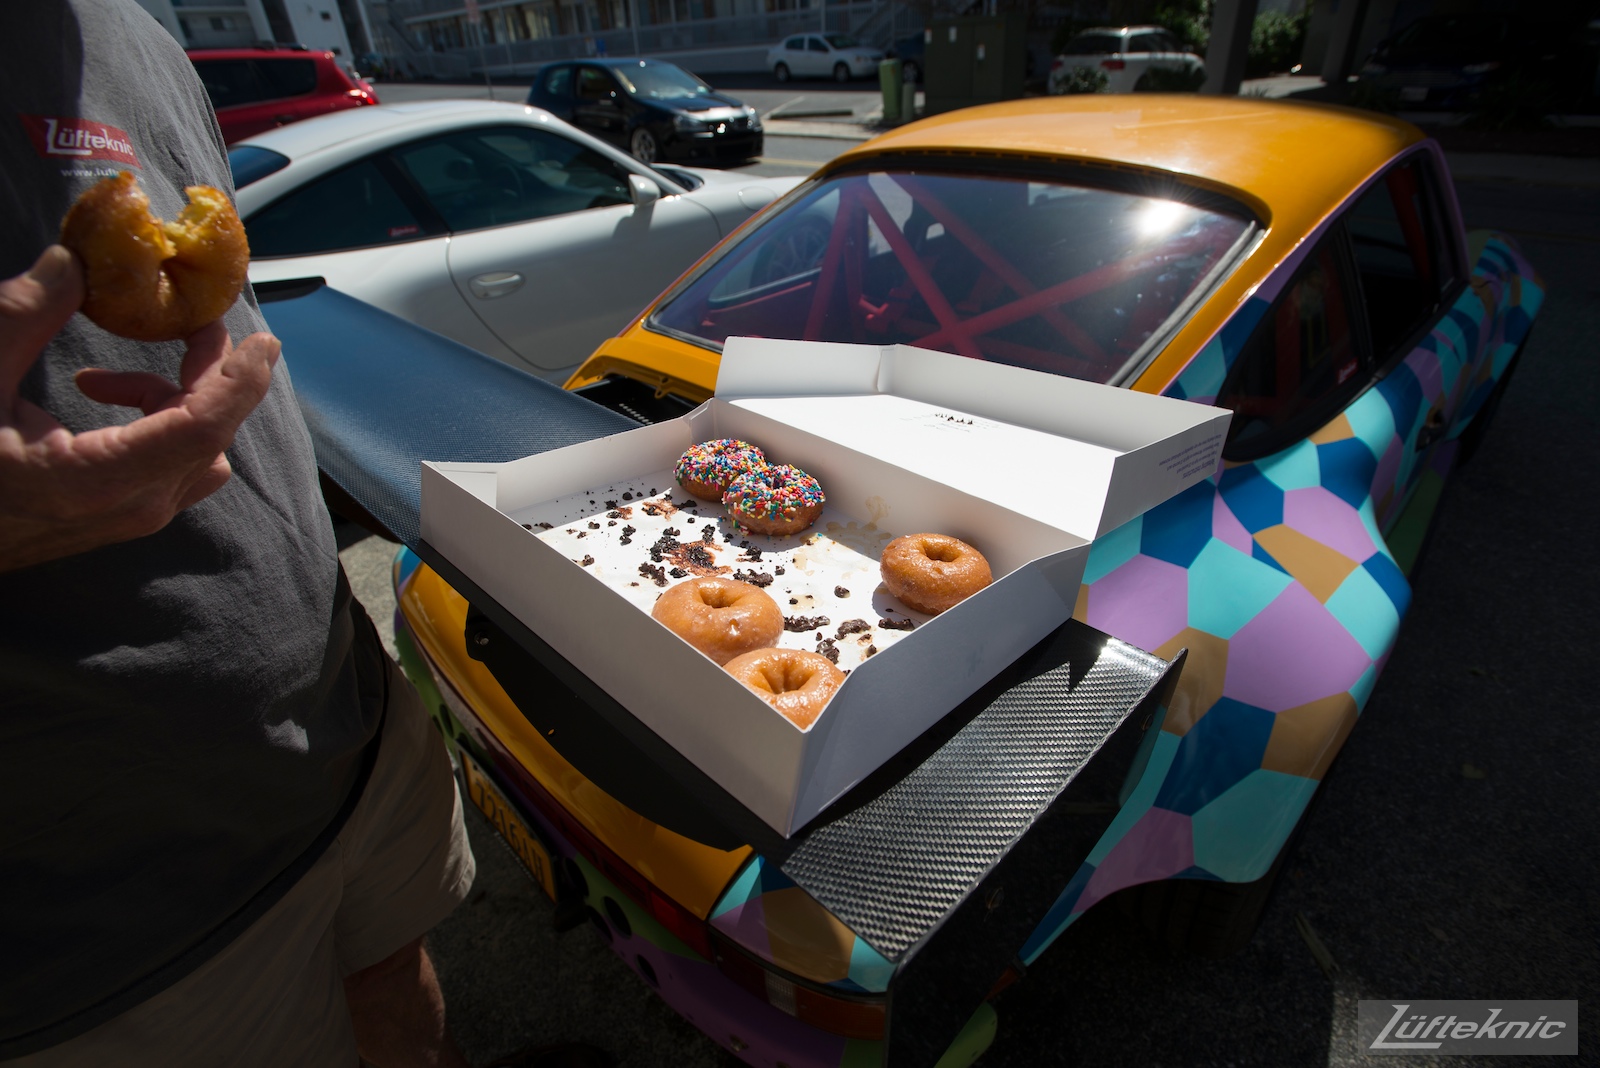 A box of donuts sitting on the raw carbon fiber wing of the Lüfteknic #projectstuka Porsche 930 Turbo